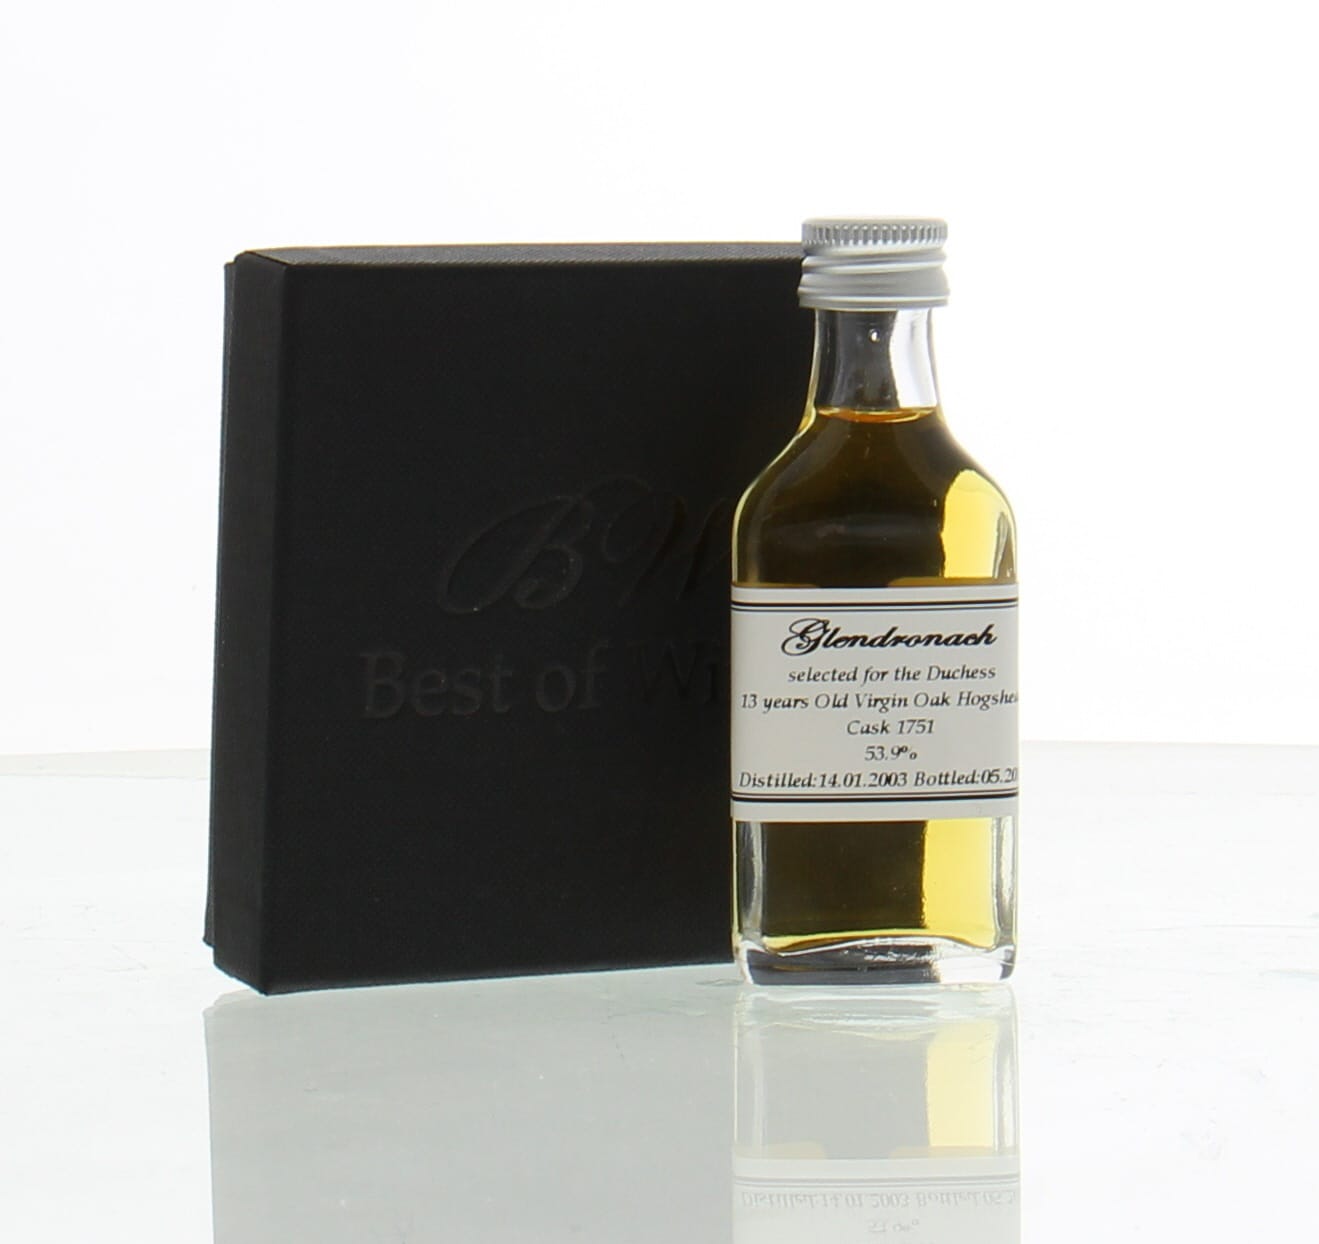 Glendronach - SAMPLE:13 Years Old Virgin Oak Cask:1751 Exclusively for The Duchess 53.9% 2003